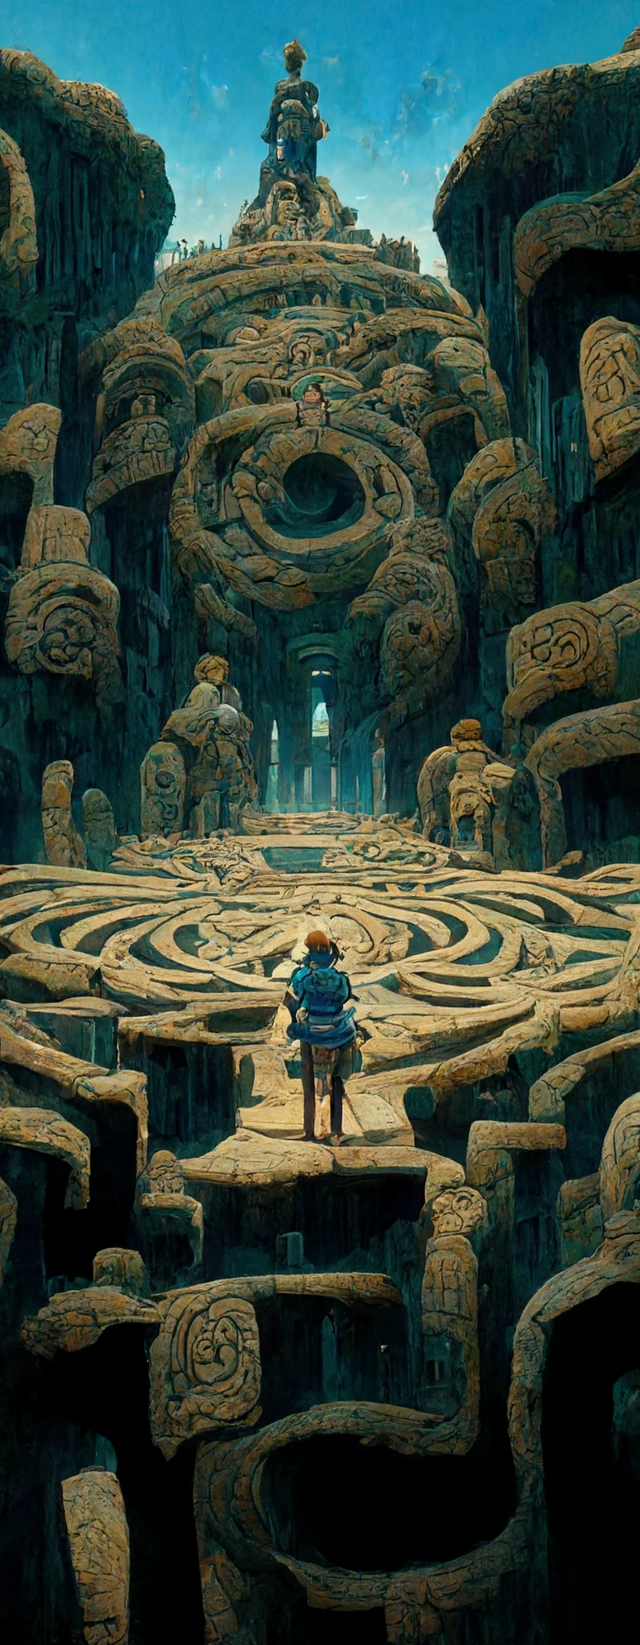 An enormous labyrinth, Beautiful architecture, Statues, Highly detailed carvings, Atmosphere, Dramatic lighting, Epic composition, Close up, Low angle, Wide angle, by Miyazaki, Nausicaa Ghibli, Breath of The Wild